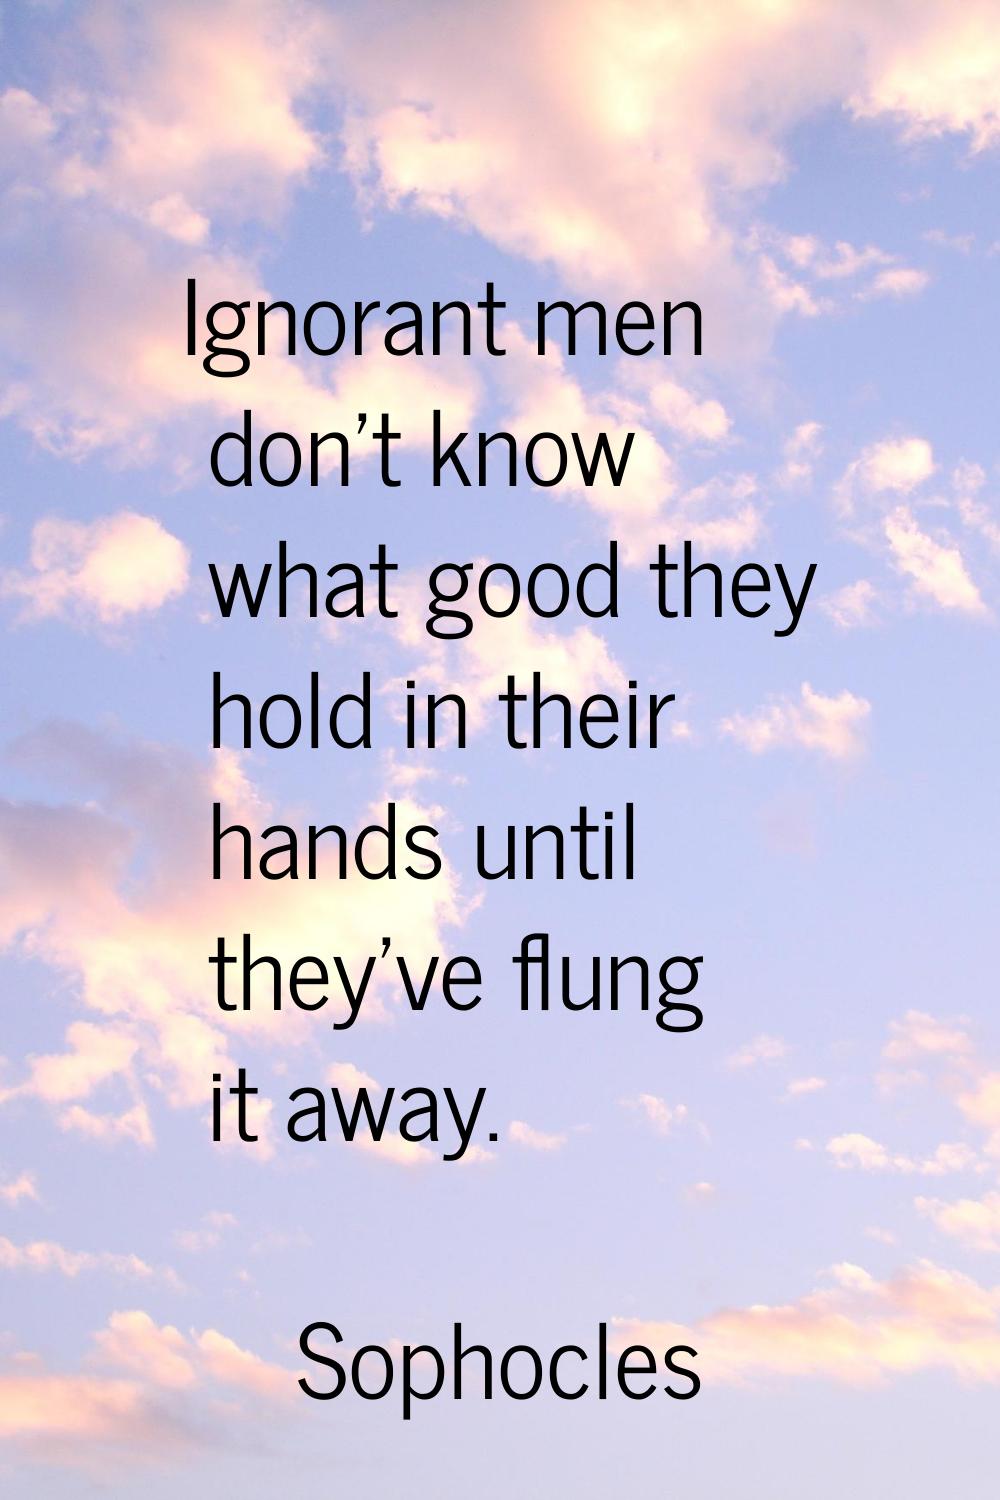 Ignorant men don't know what good they hold in their hands until they've flung it away.